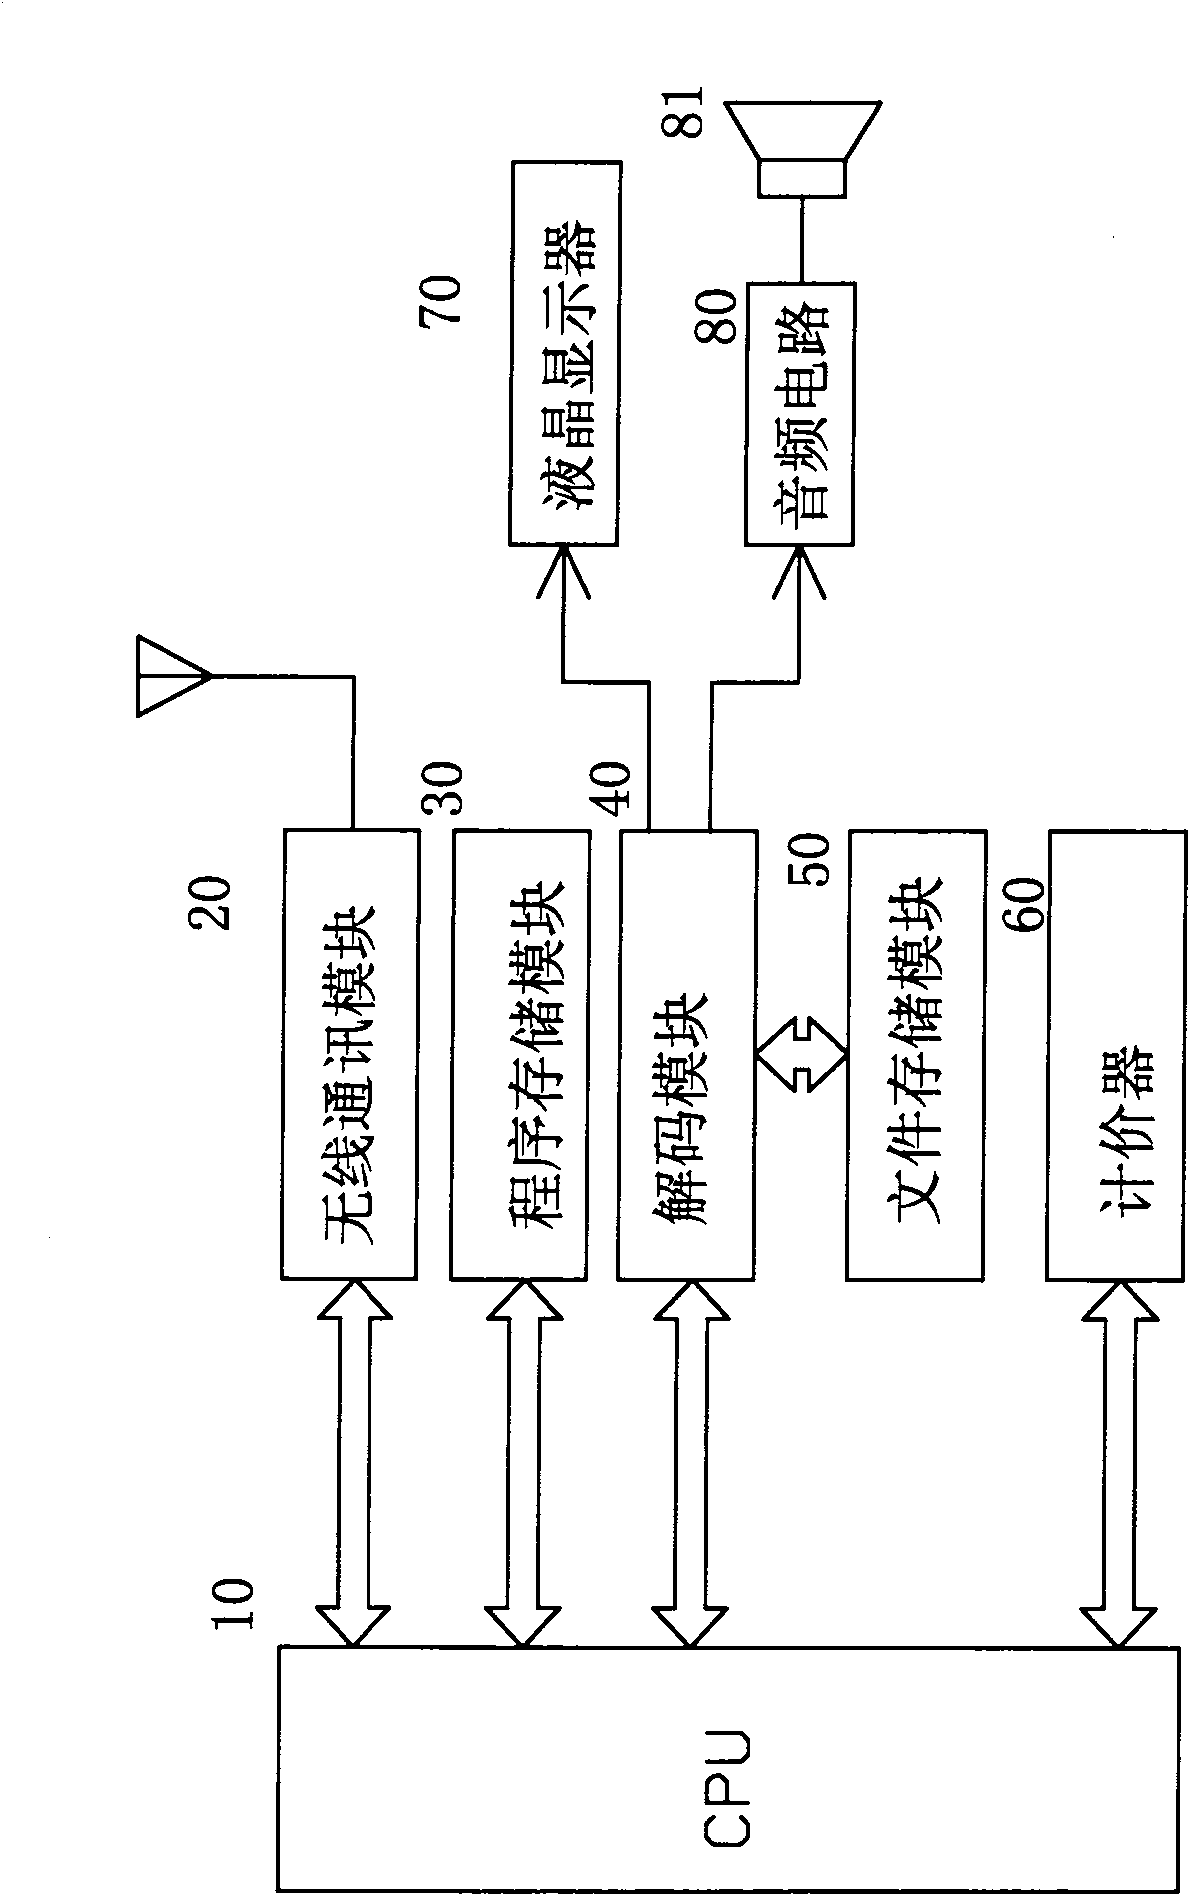 Taxi networked advertisement playing method and apparatus